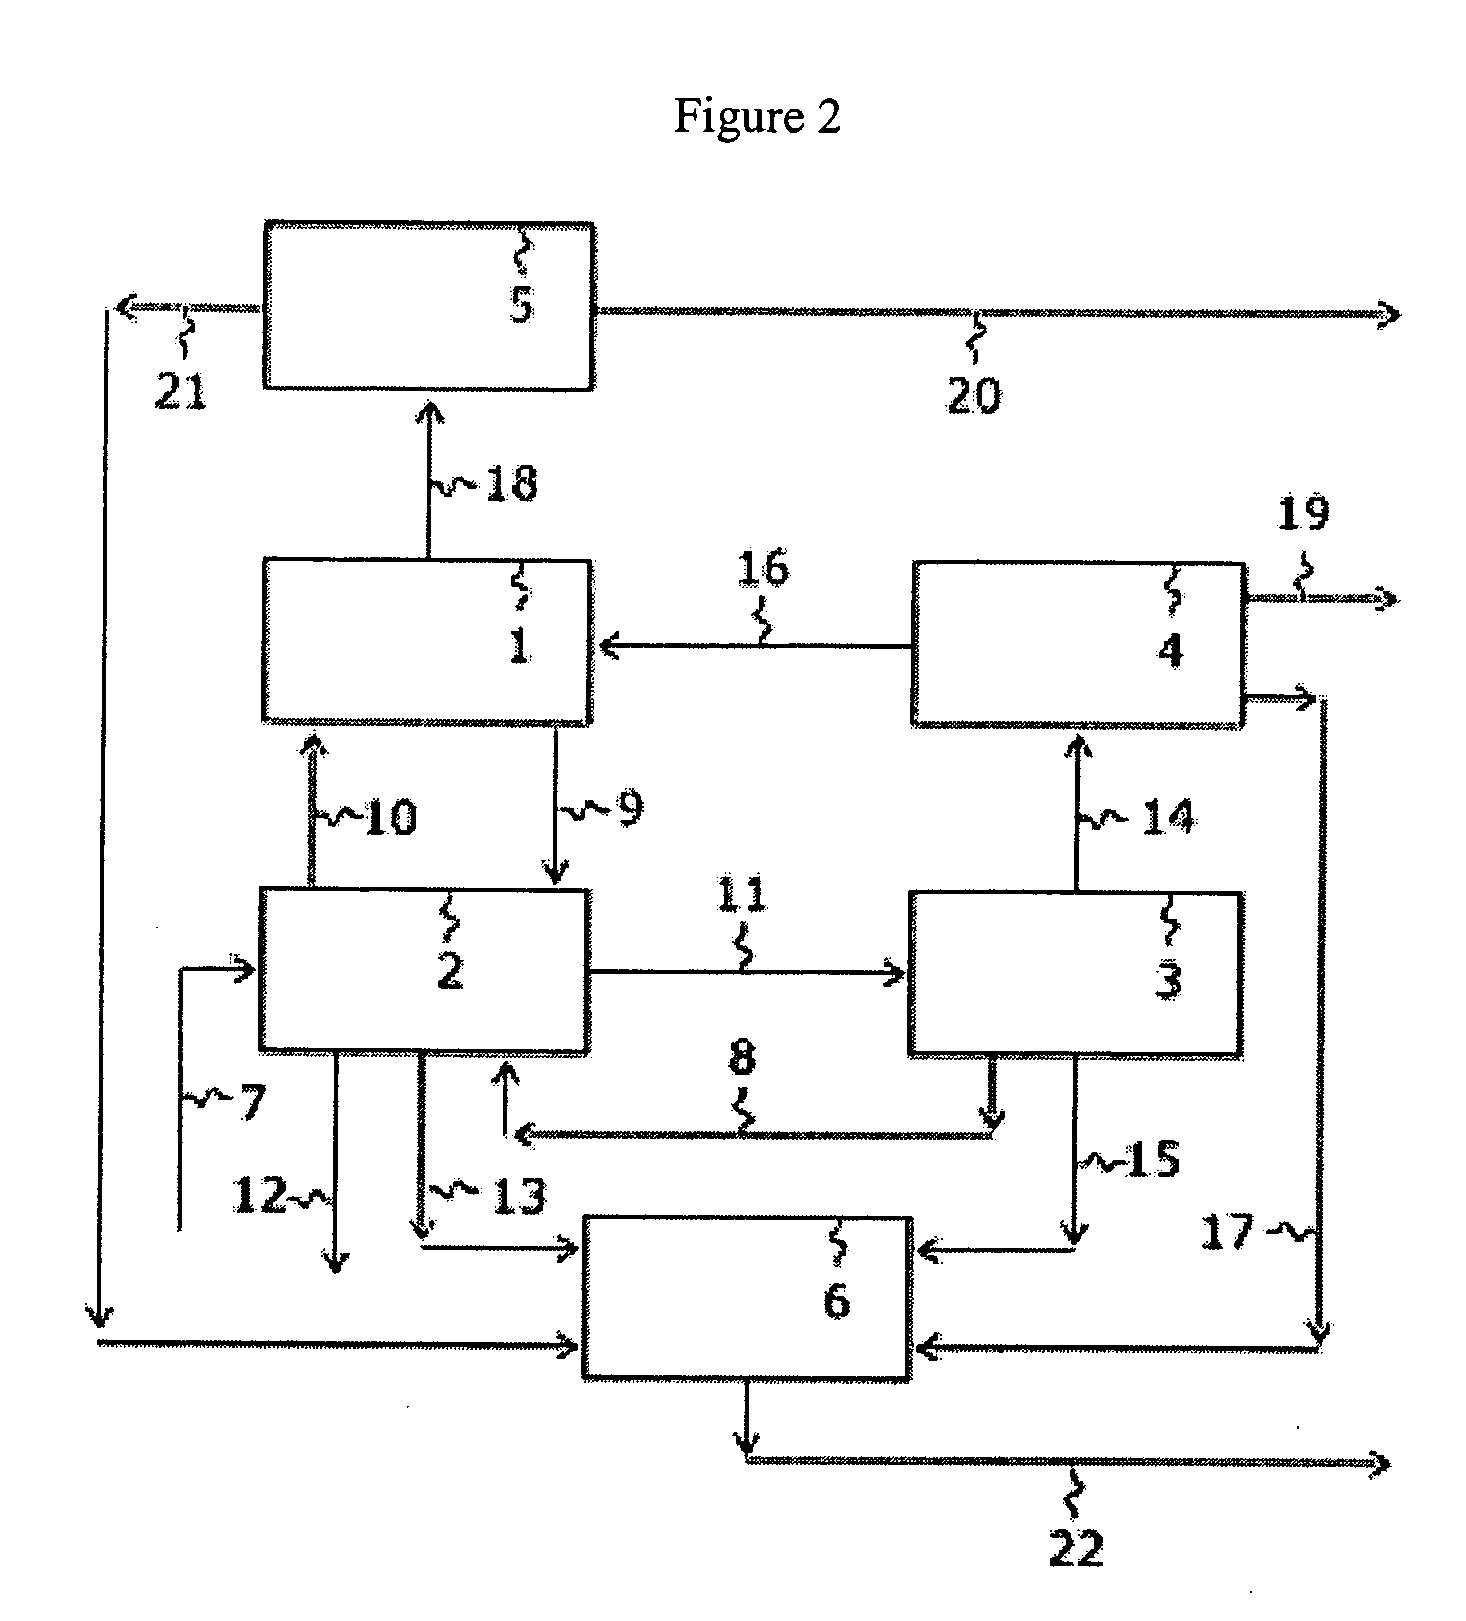 Method and apparatus for local fluorine and nitrogen trifluoride production